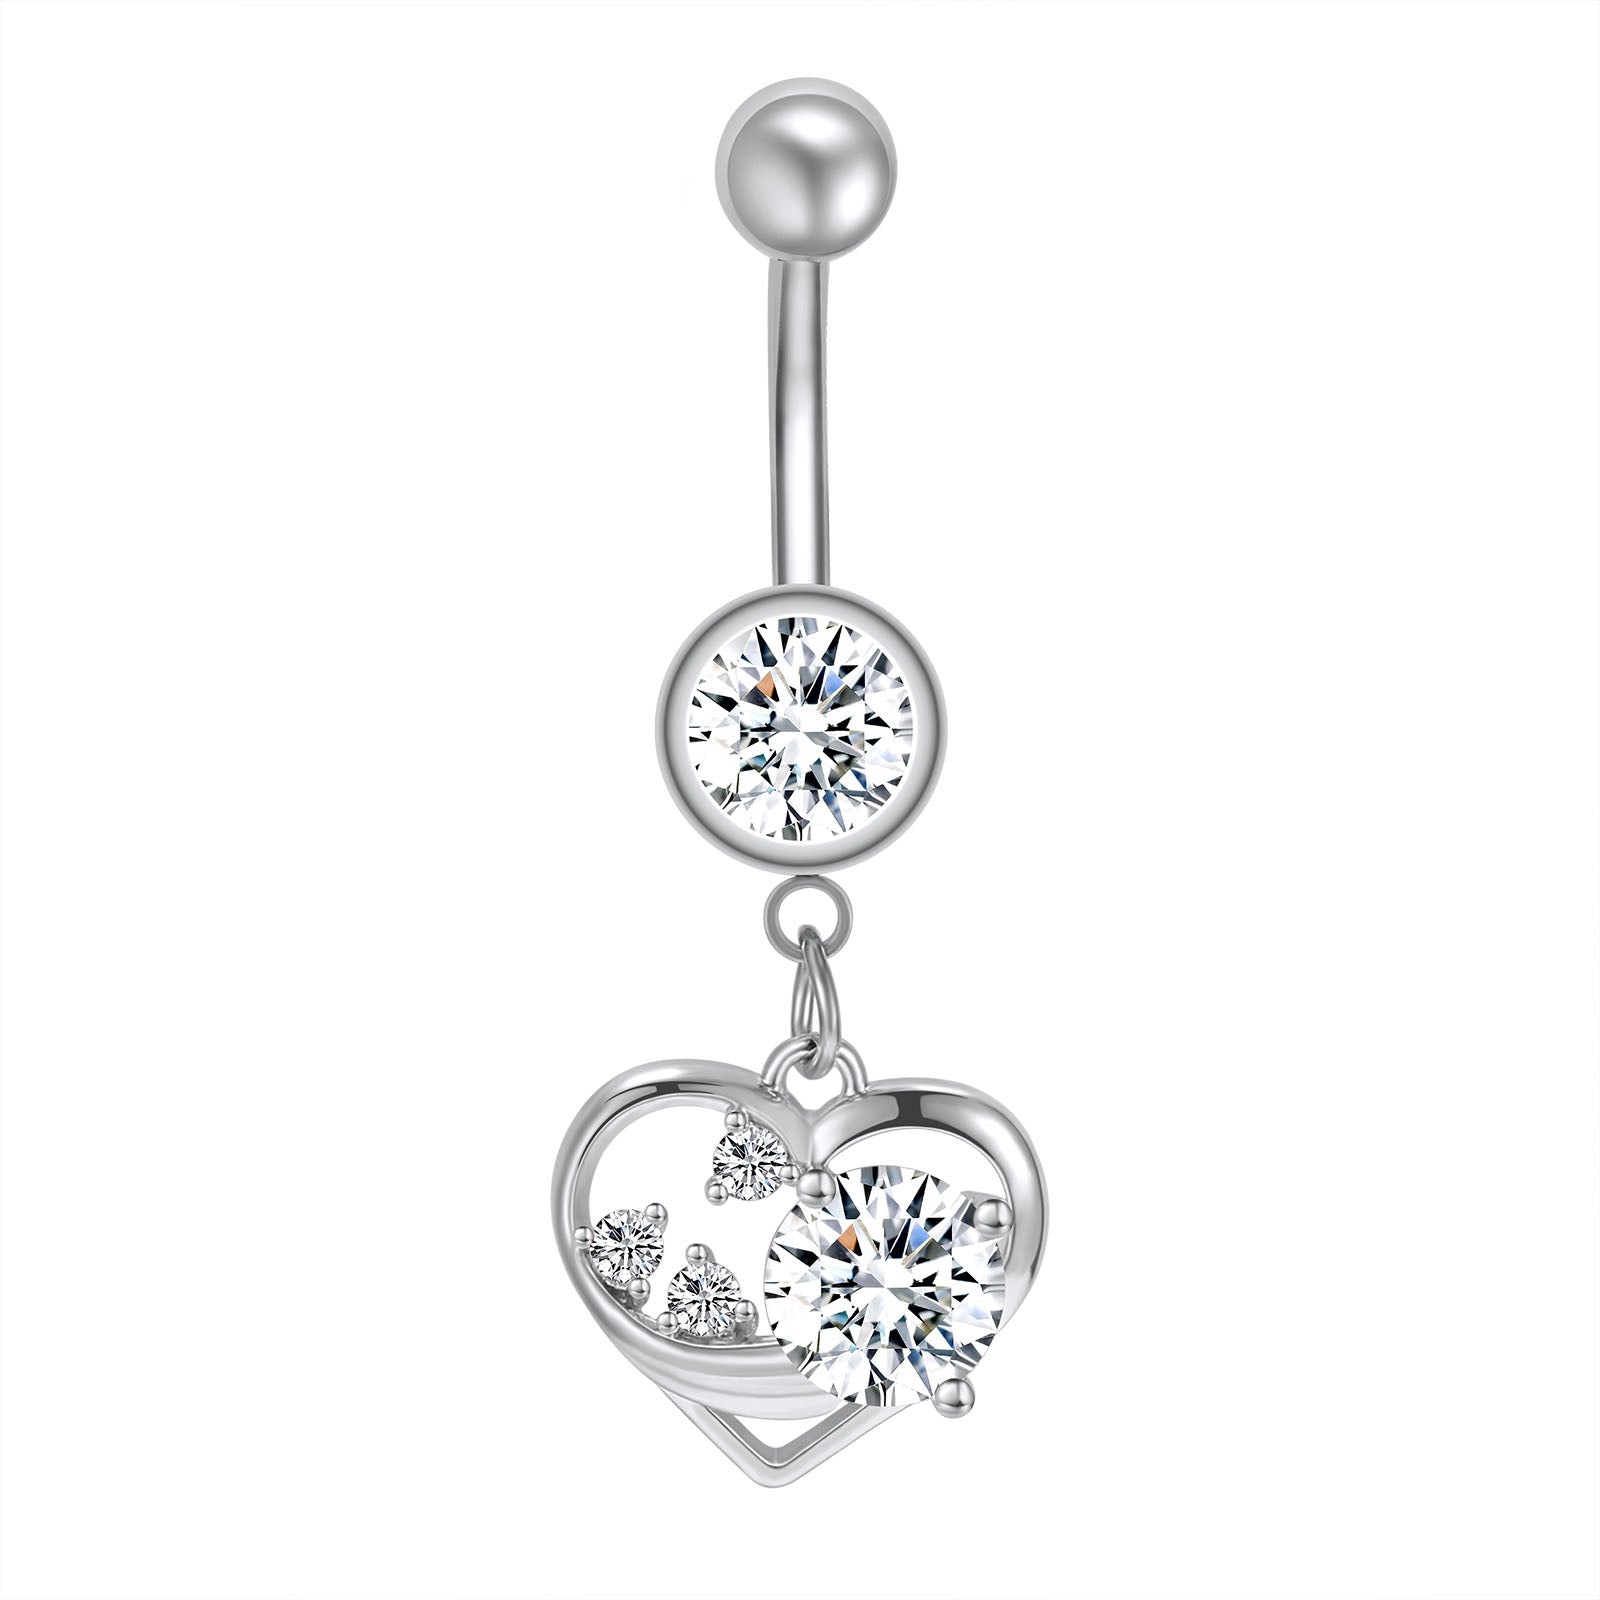 14g-Dangle-Heart-Rose-Gold-Belly-Rings-Double-Crystal-Navel-Ring-Piercing-Jewelry